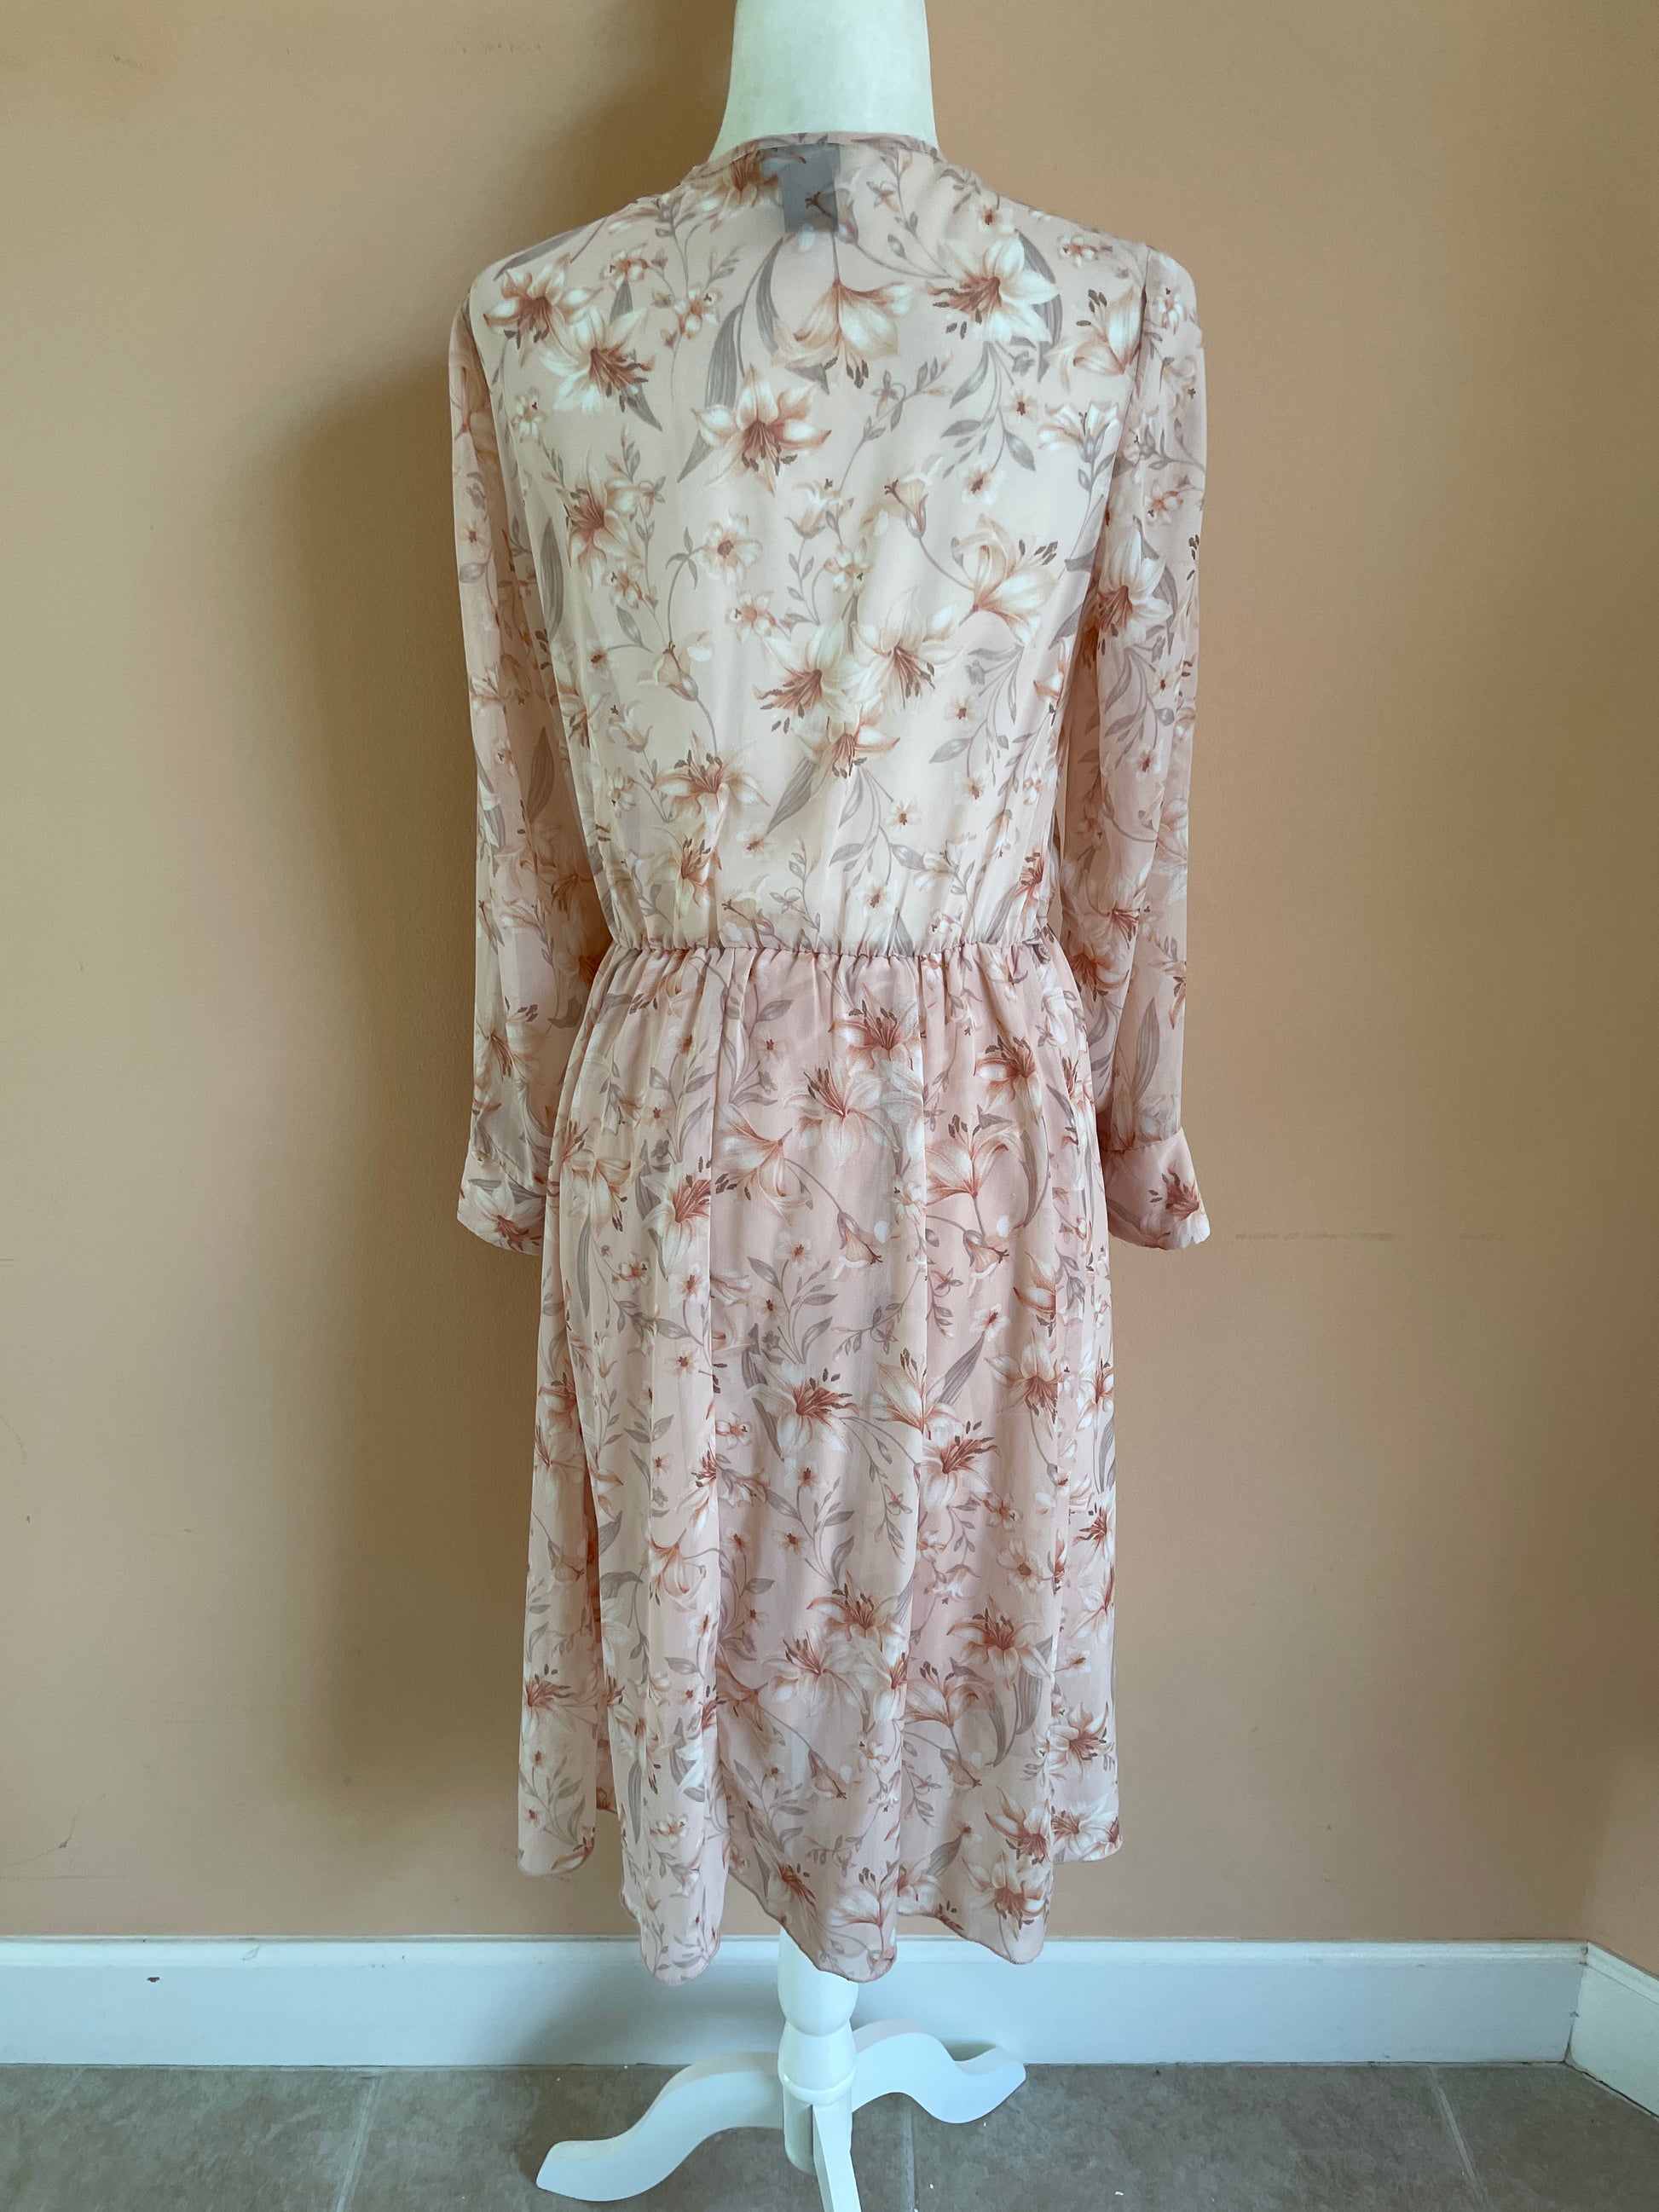  2000’s Pink Floral Sheer Poly Dress S/M